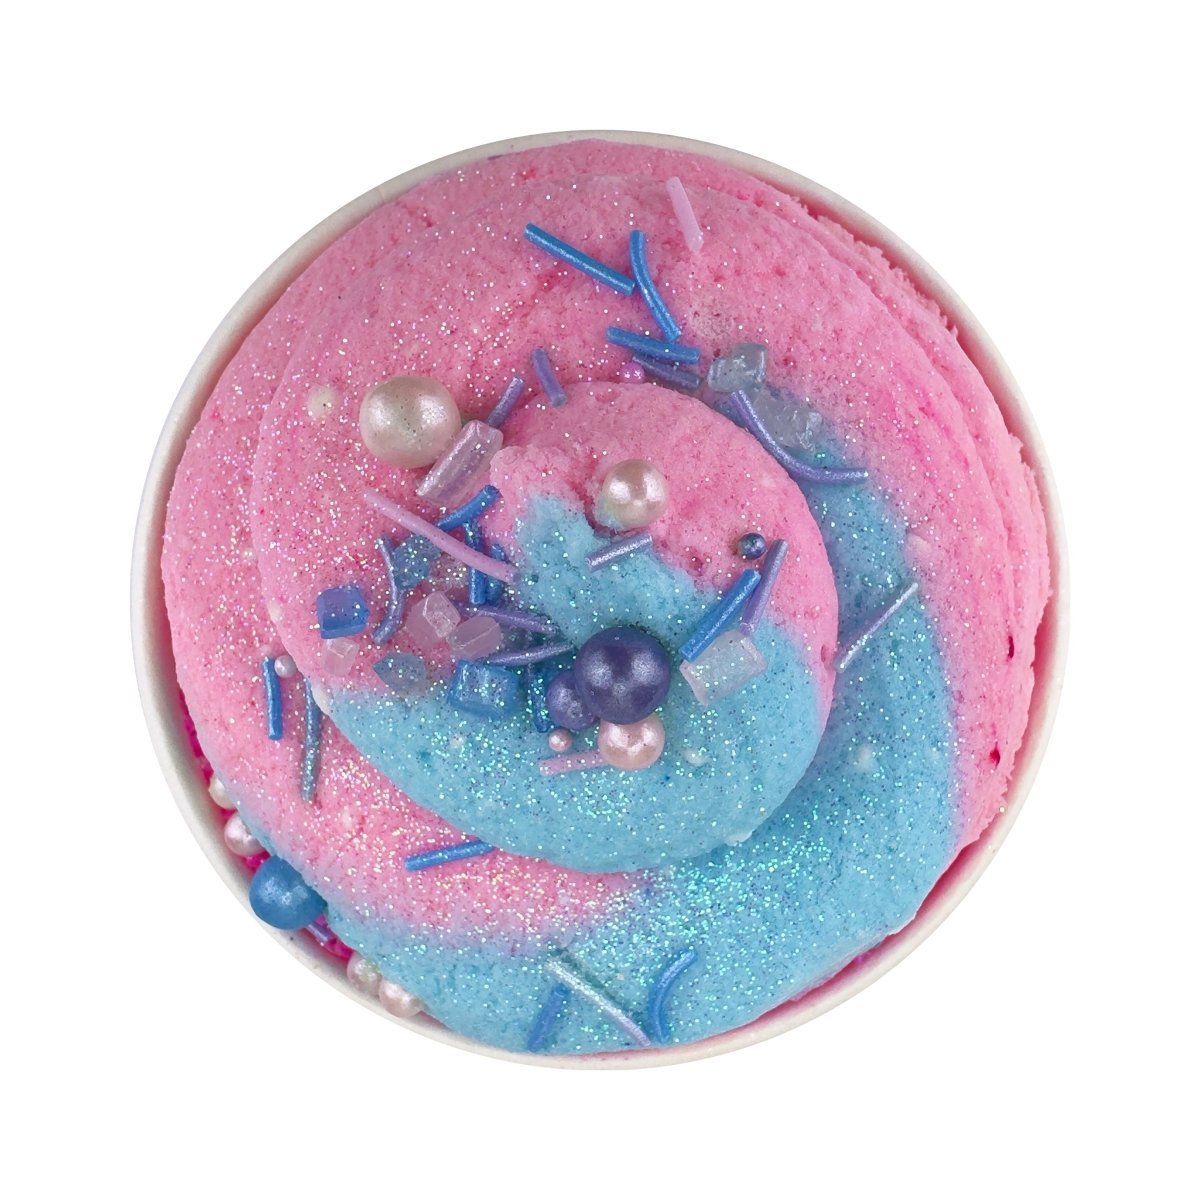 Fairy Floss Bath Bomb Ice Cream Cup for Kids & Adults - Large Colourful Glitter & Sprinkles - Made in Australia by Bath Box